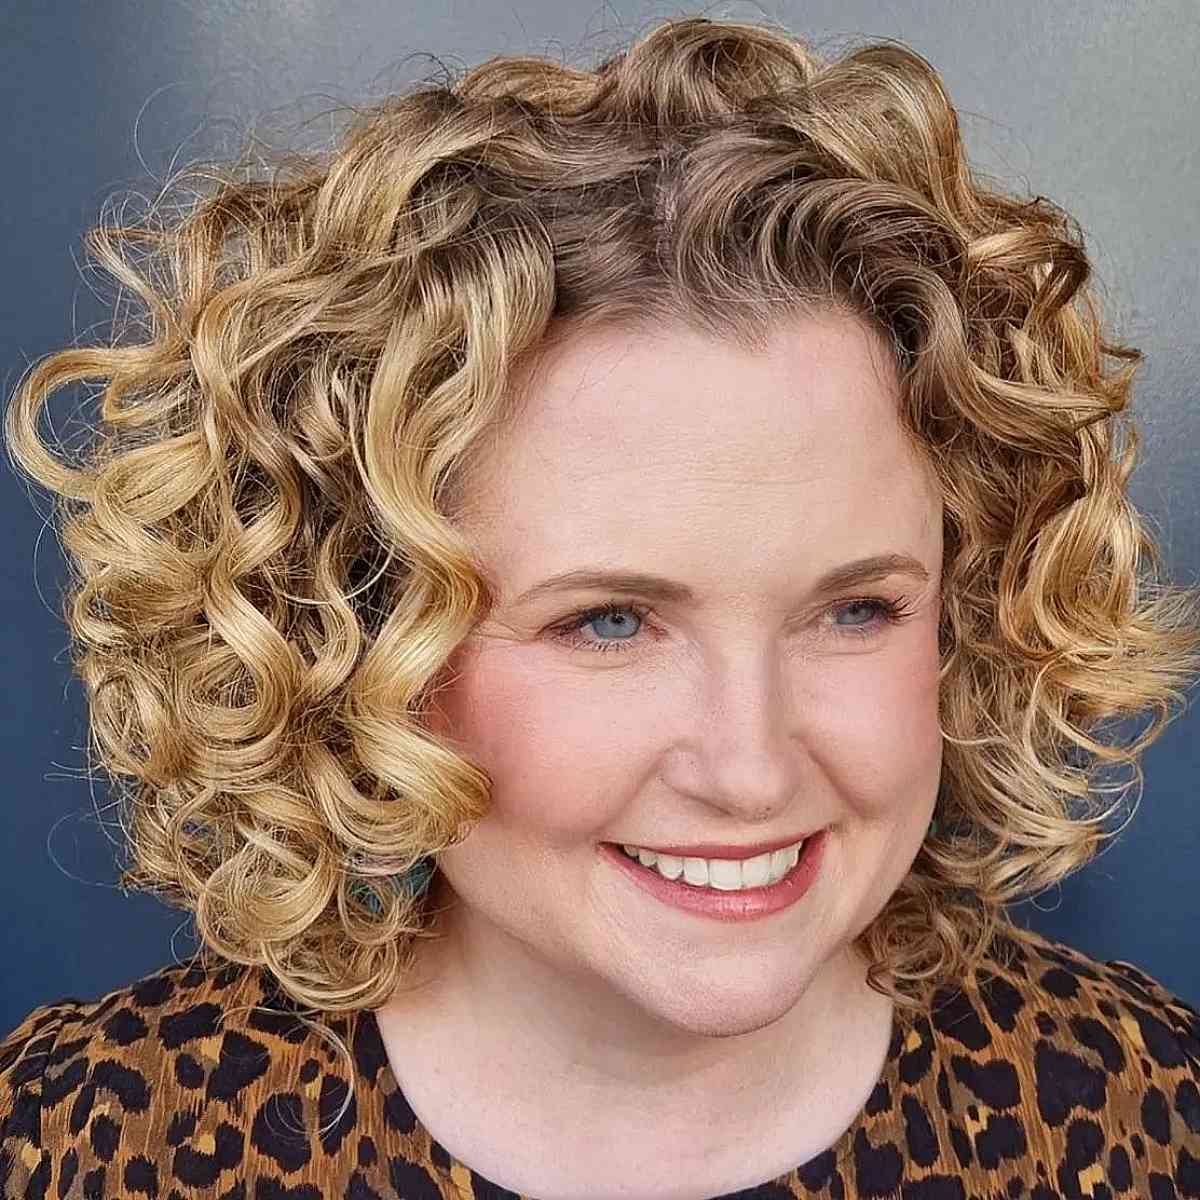 Curly Bob Hairstyle for Ladies Over Fifty with Round Face Shapes